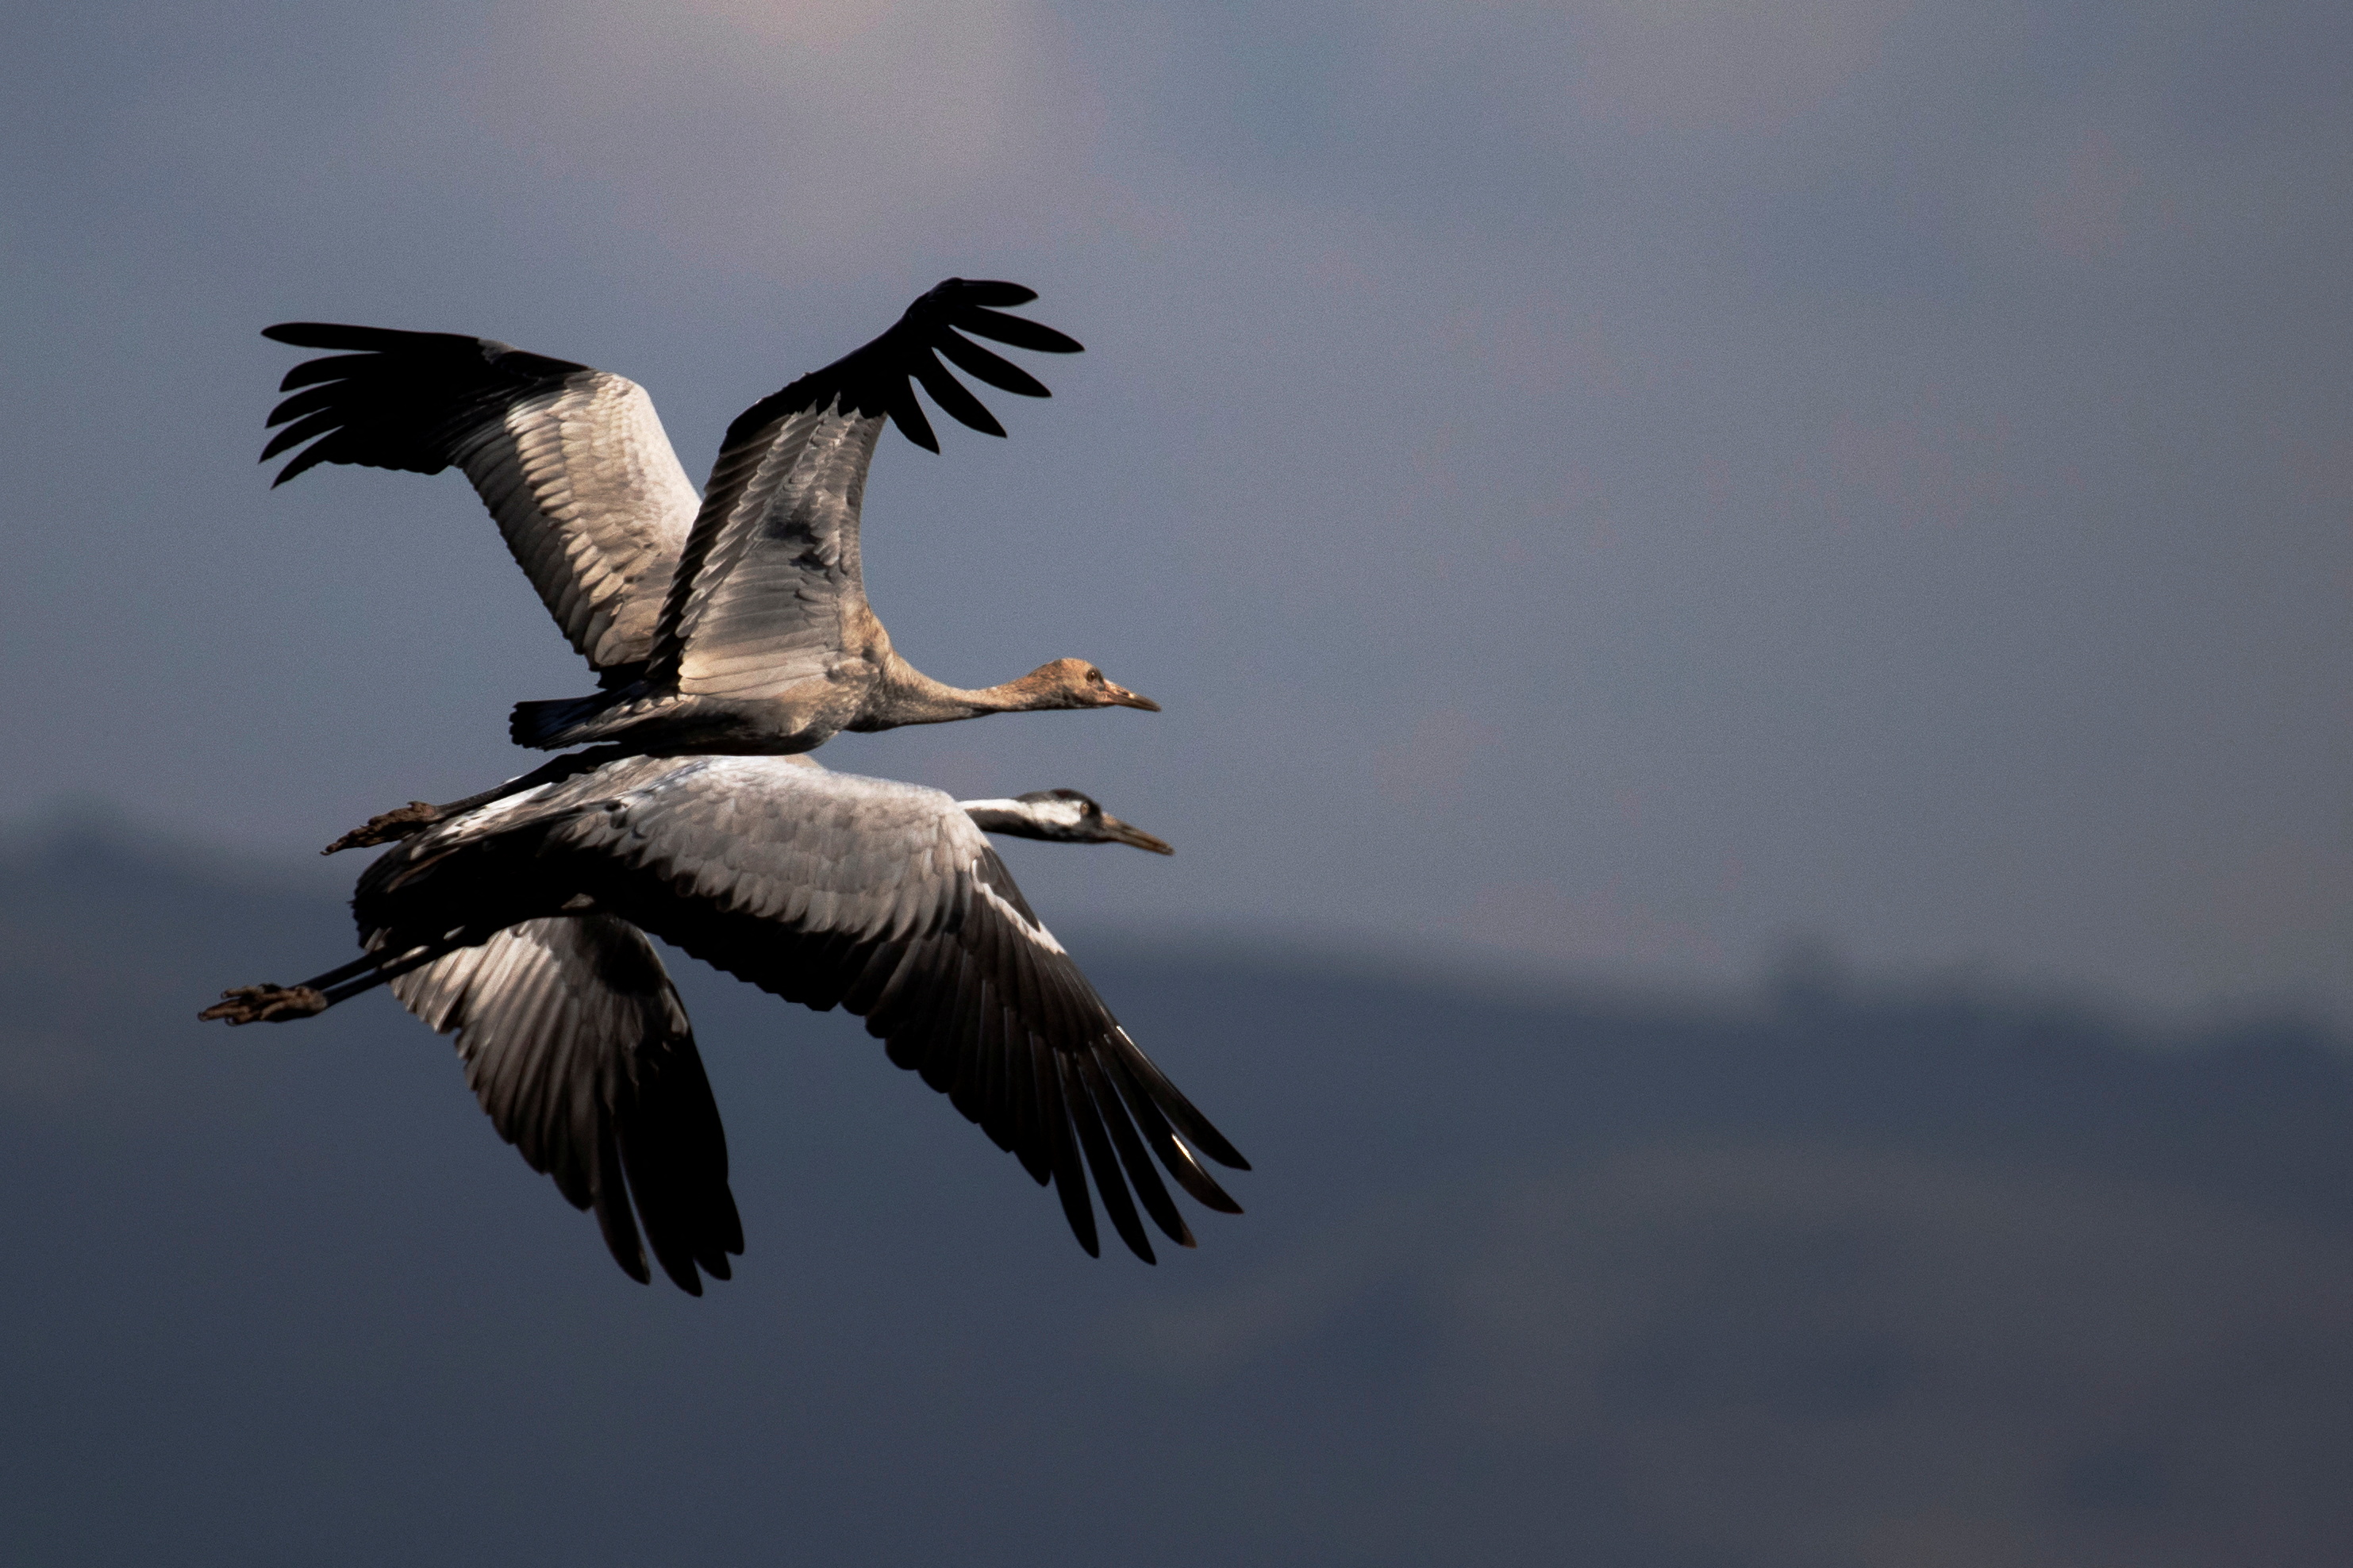 Cranes fly during the migration season at Hula Nature Reserve, in northern Israel